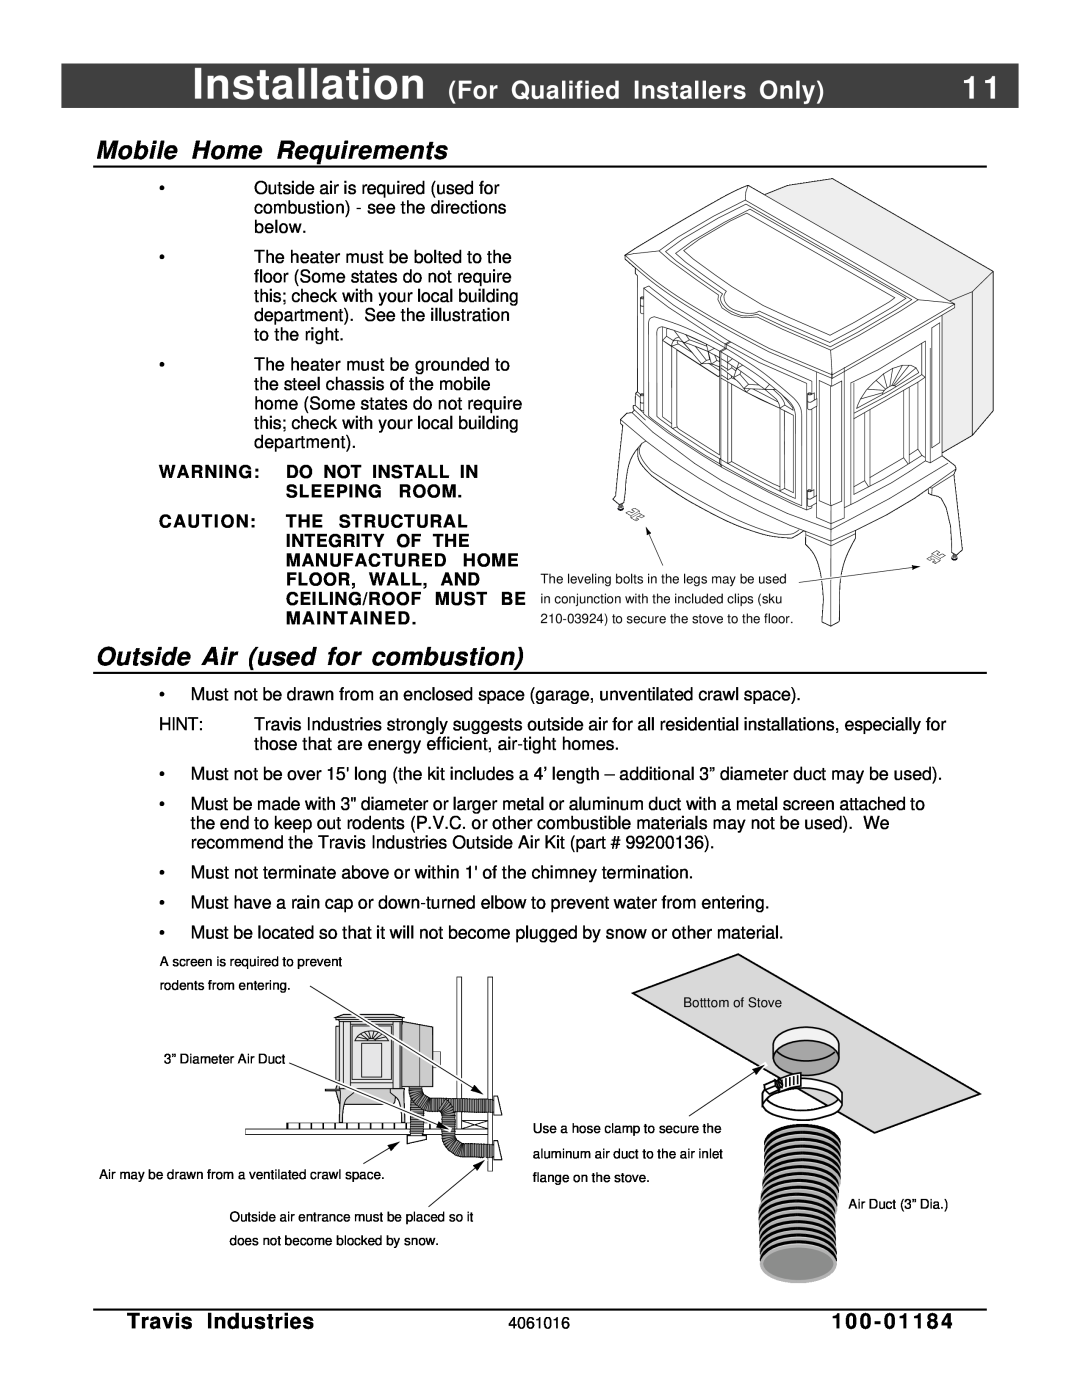 Lopi Leyden Pellet Stove manual Mobile Home Requirements, Outside Air used for combustion, Travis Industries, 1 0 0 - 0 1 